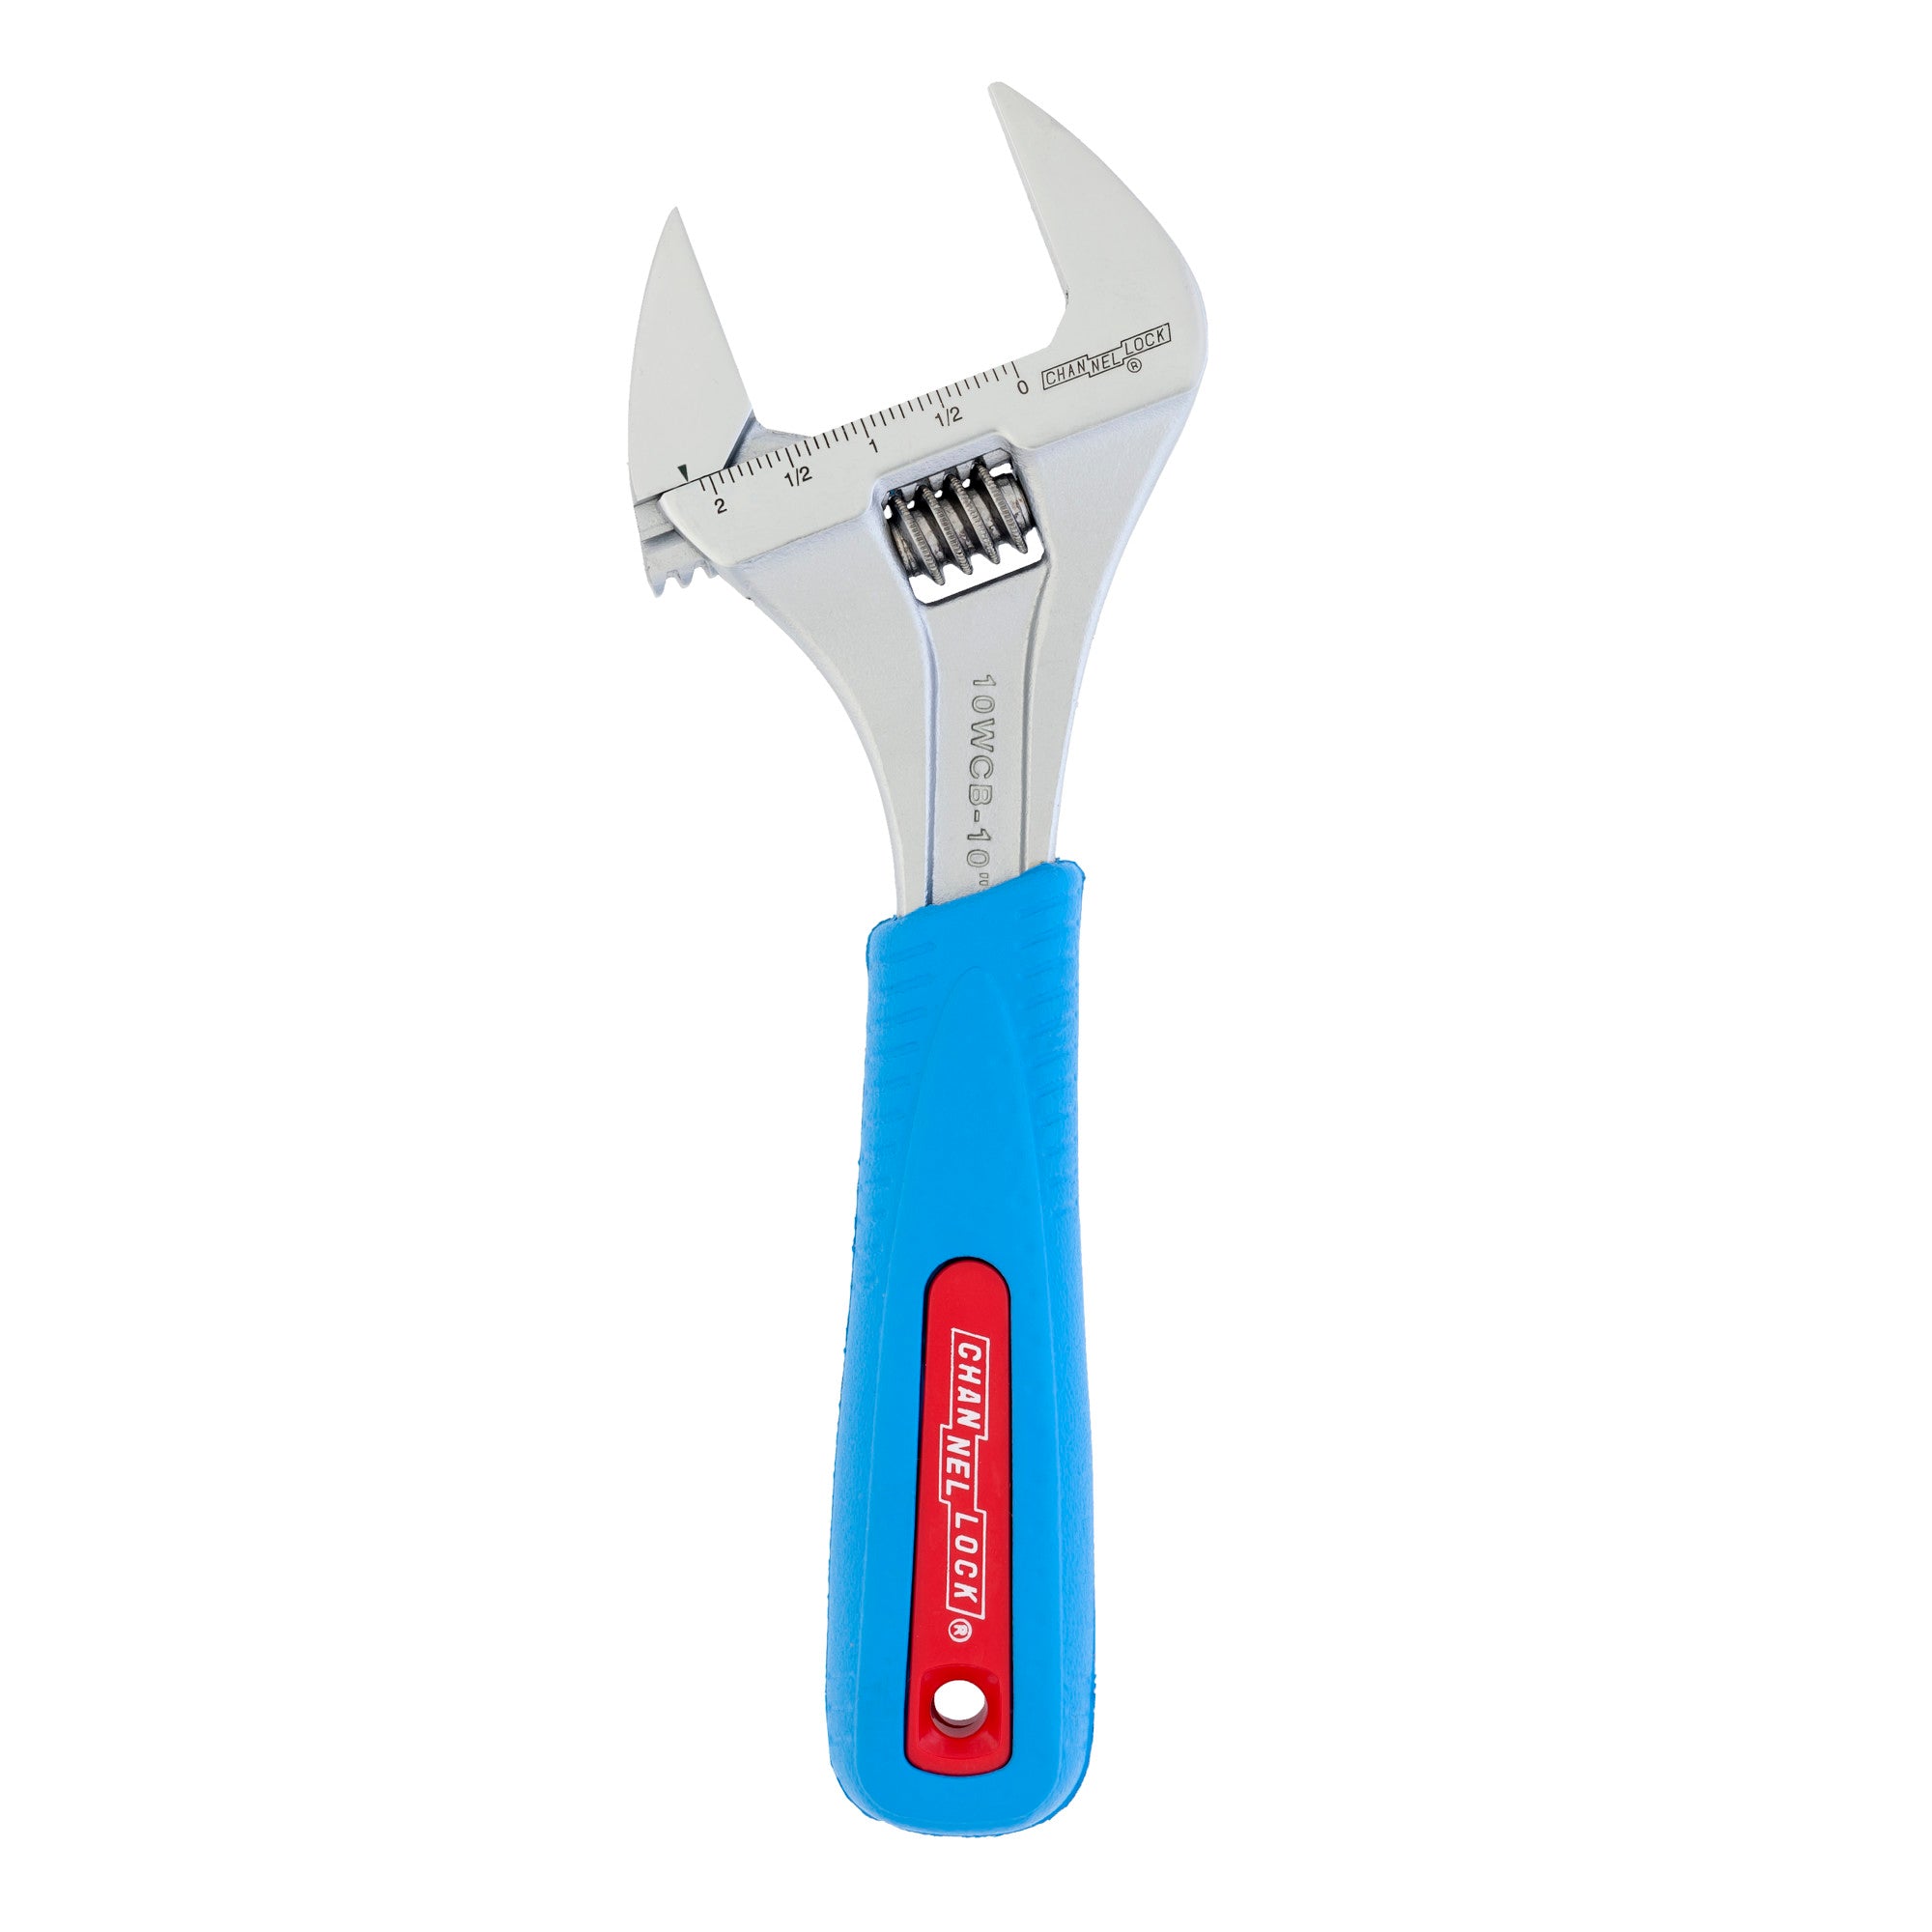 Channellock Reversible Jaw Adjustable Wrench, 2018-01-25, Plumbing and  Mechanical